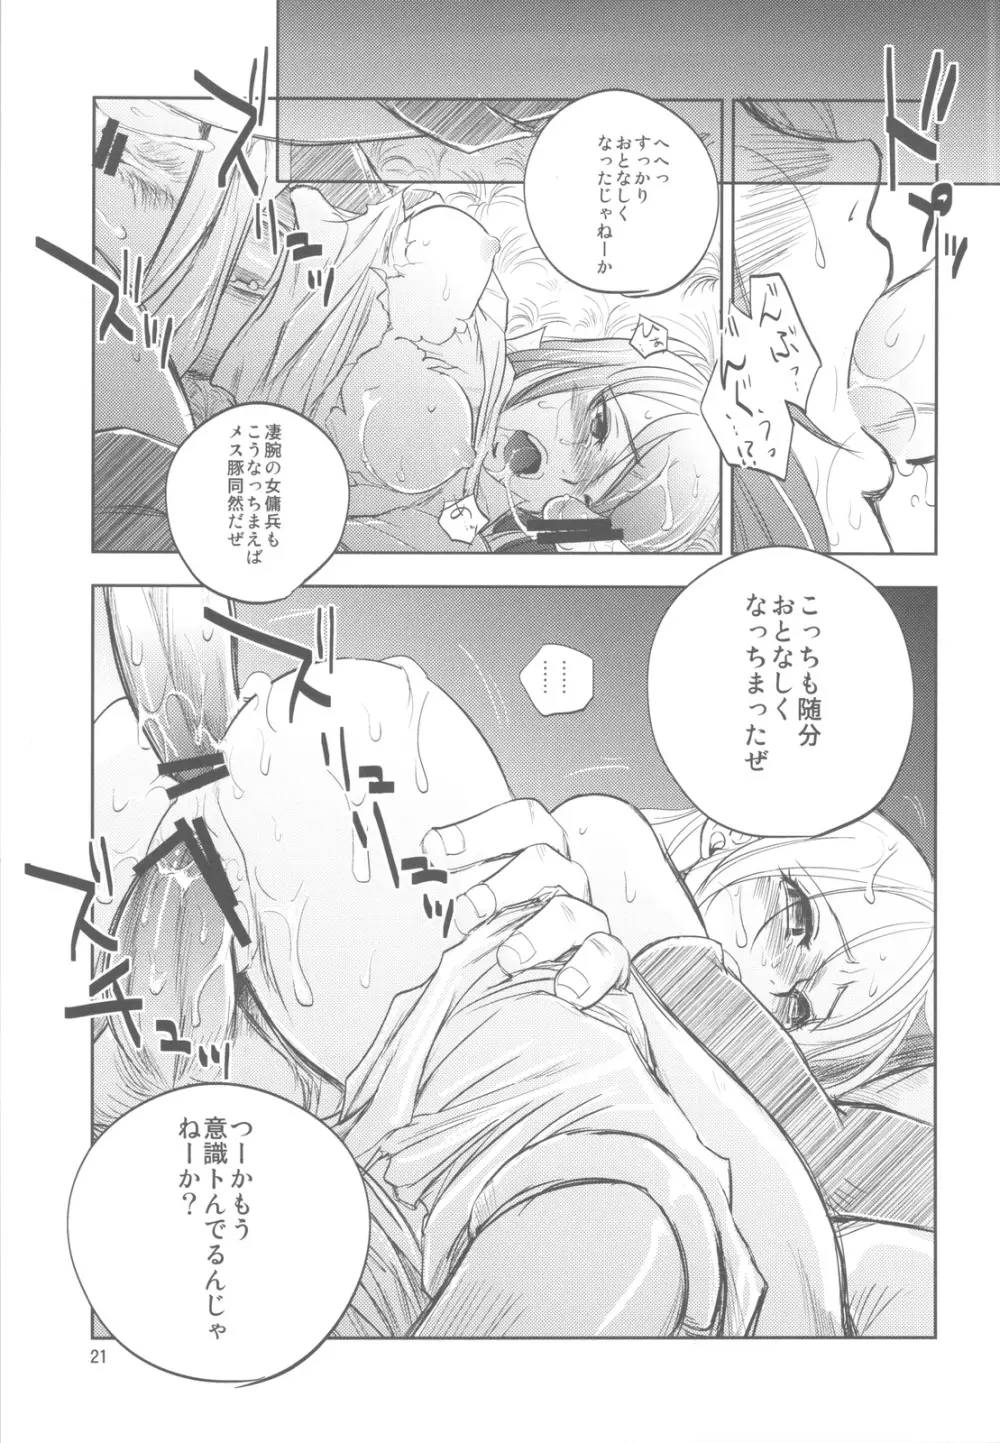 GRASSEN'S WAR ANOTHER STORY Ex #01 ノード侵攻 I - page20